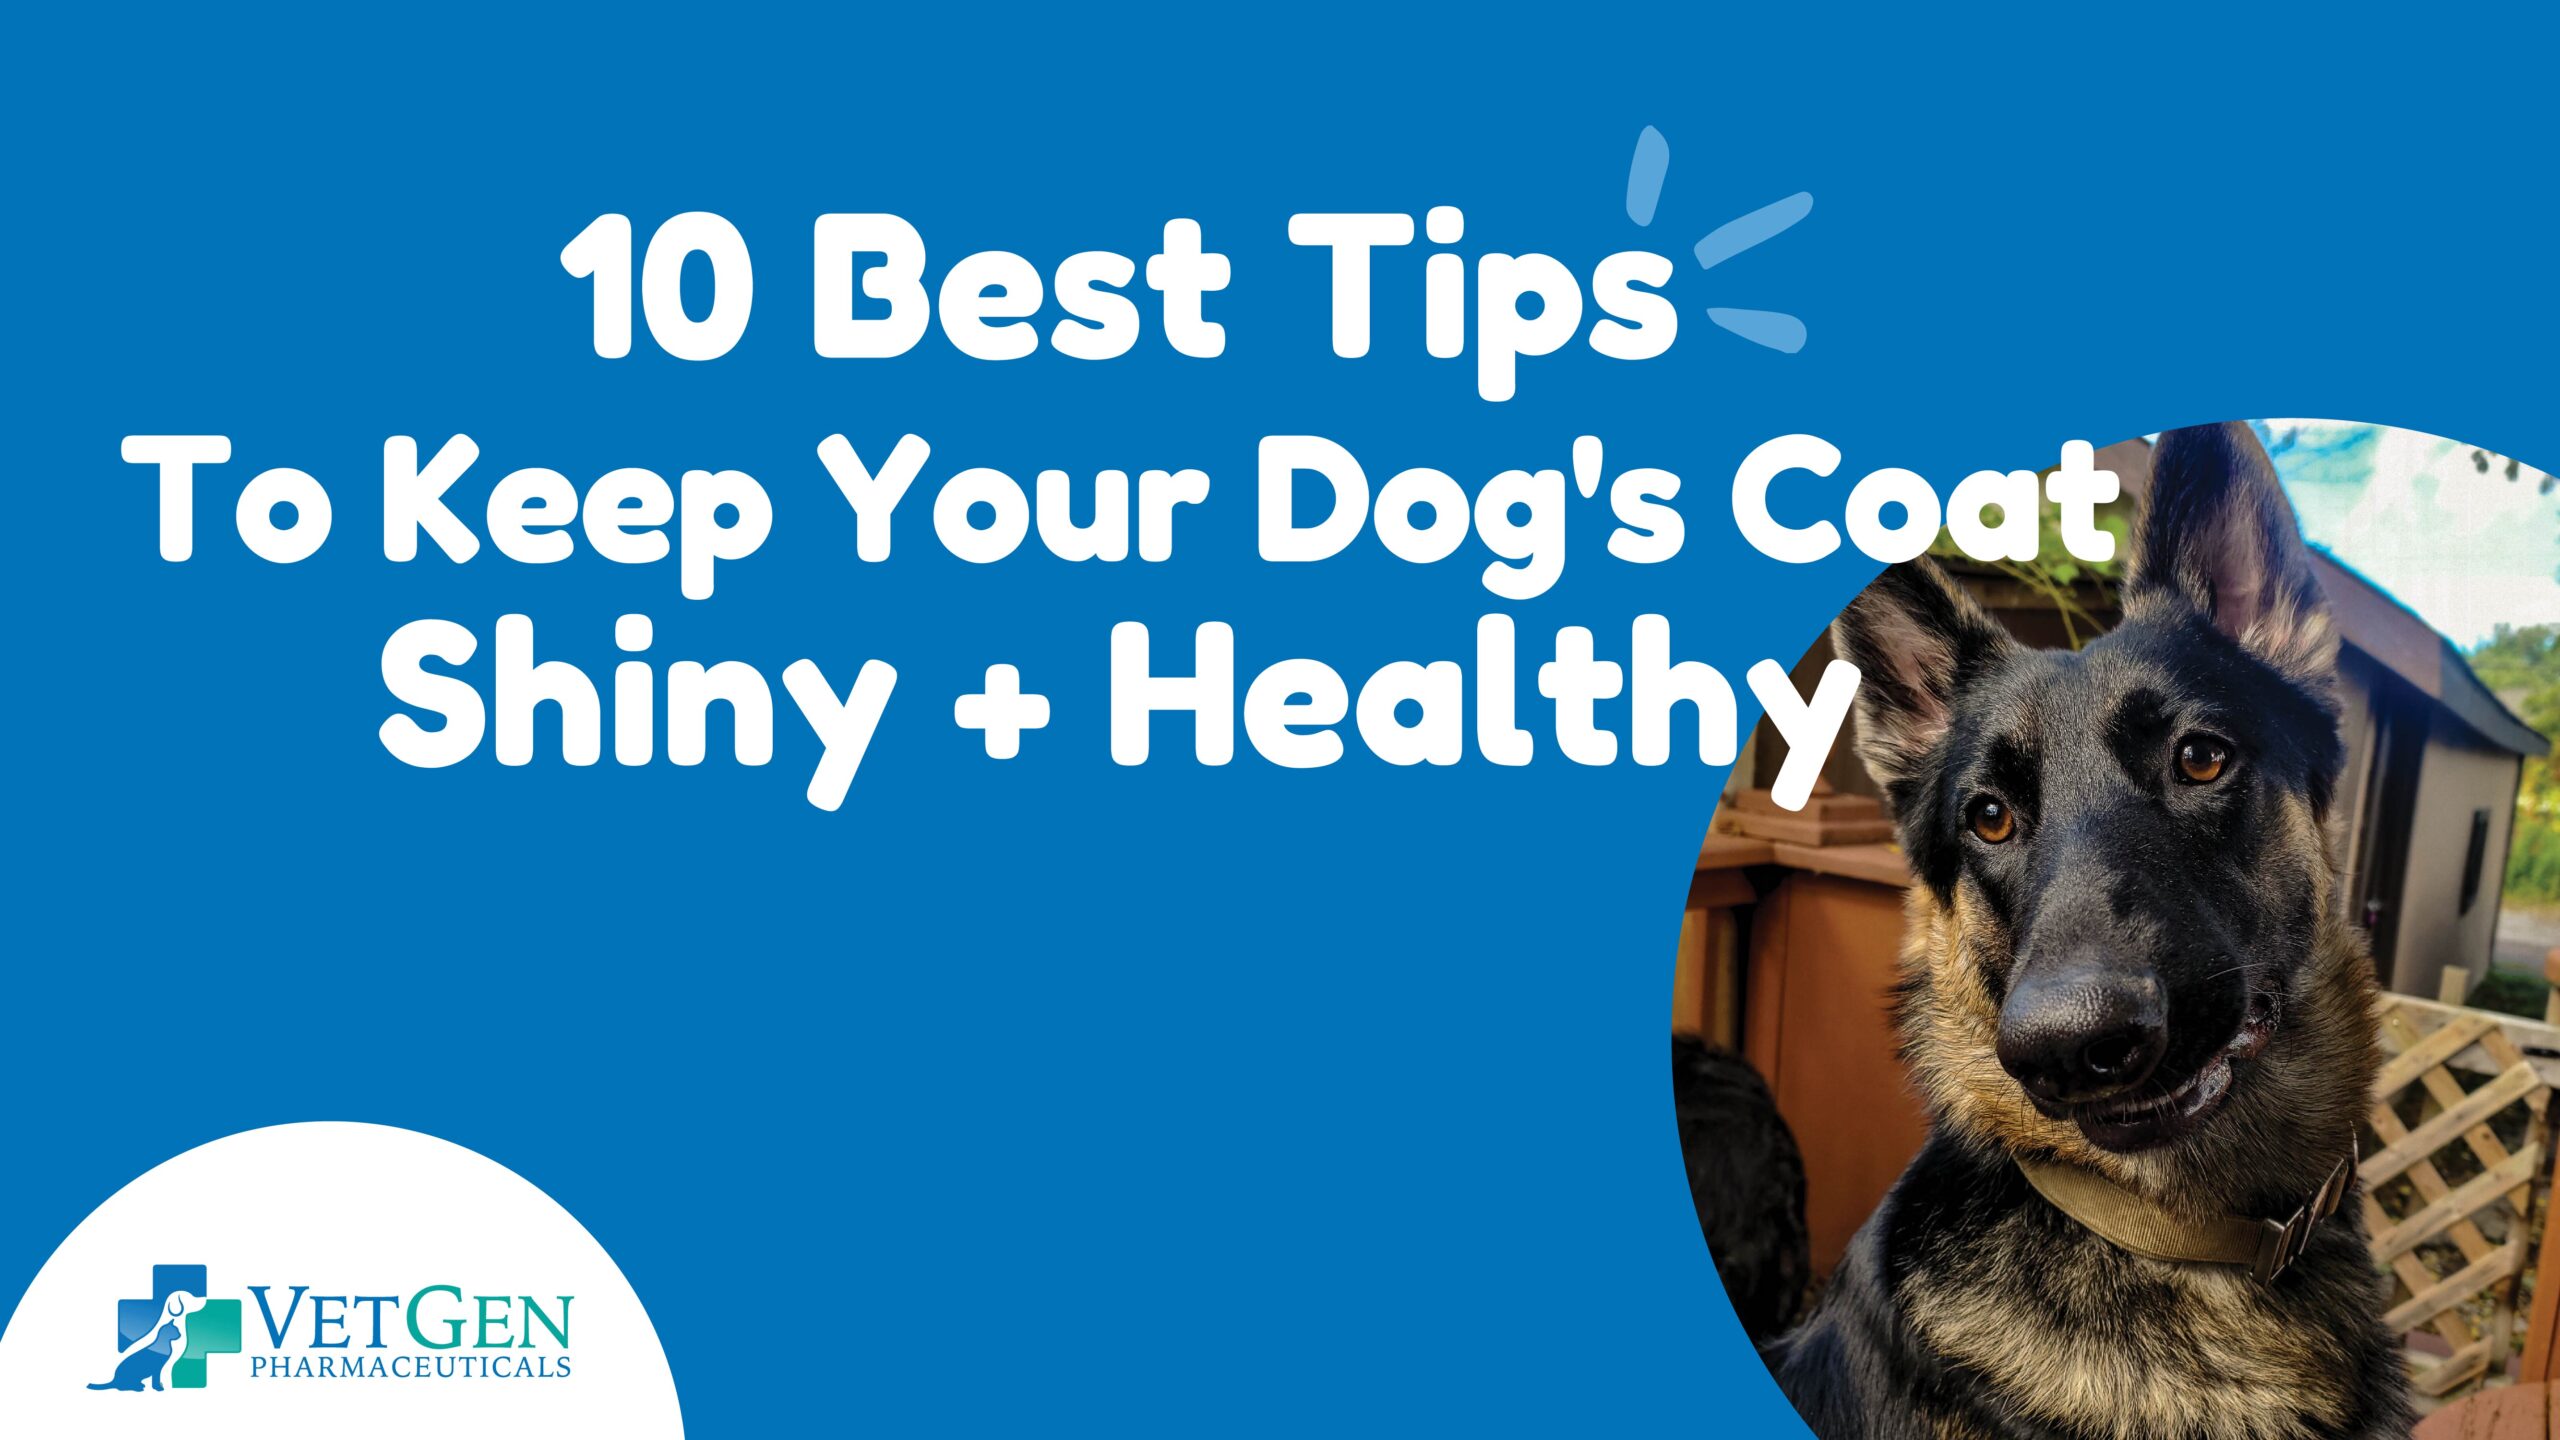 B_10 Best Tips to Keep Your Dog’s Coat Shiny and Healthy